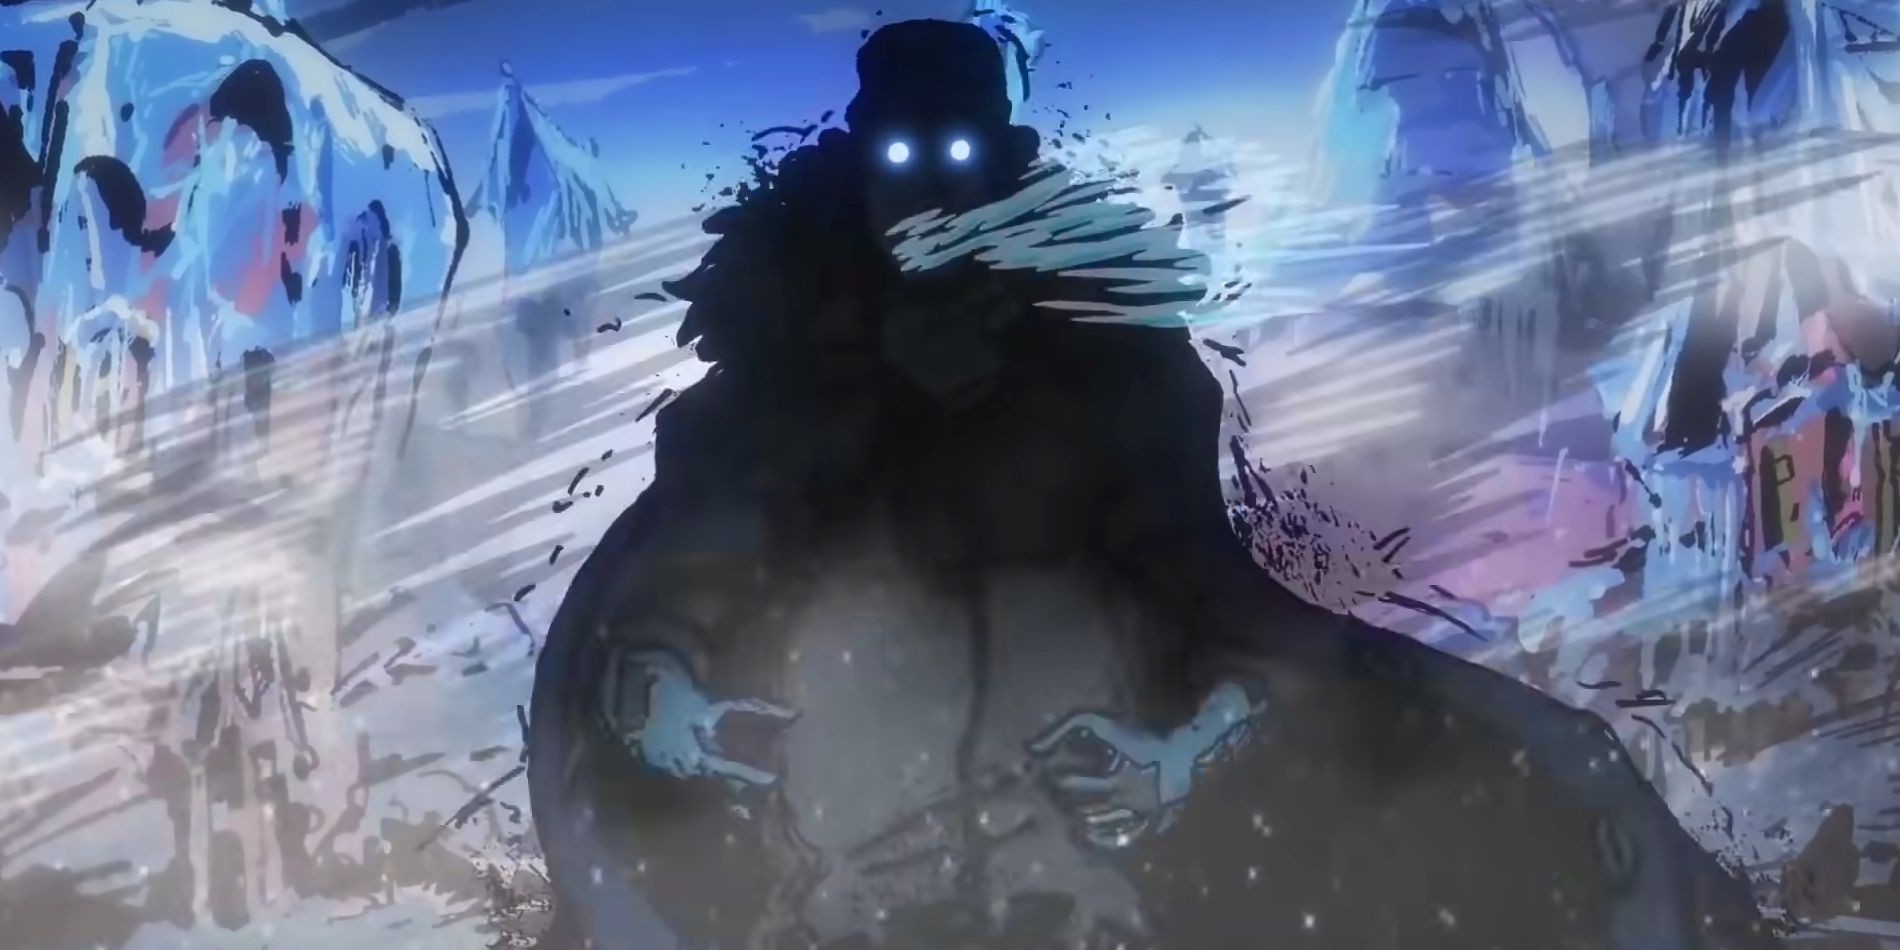 Screenshot from One Piece anime episode 1093 shows a heavily shadowed and intimdating Kuzan getting ready to use his ice devil fruit against Cracker on Whole Cake Island while his eyes glow white.